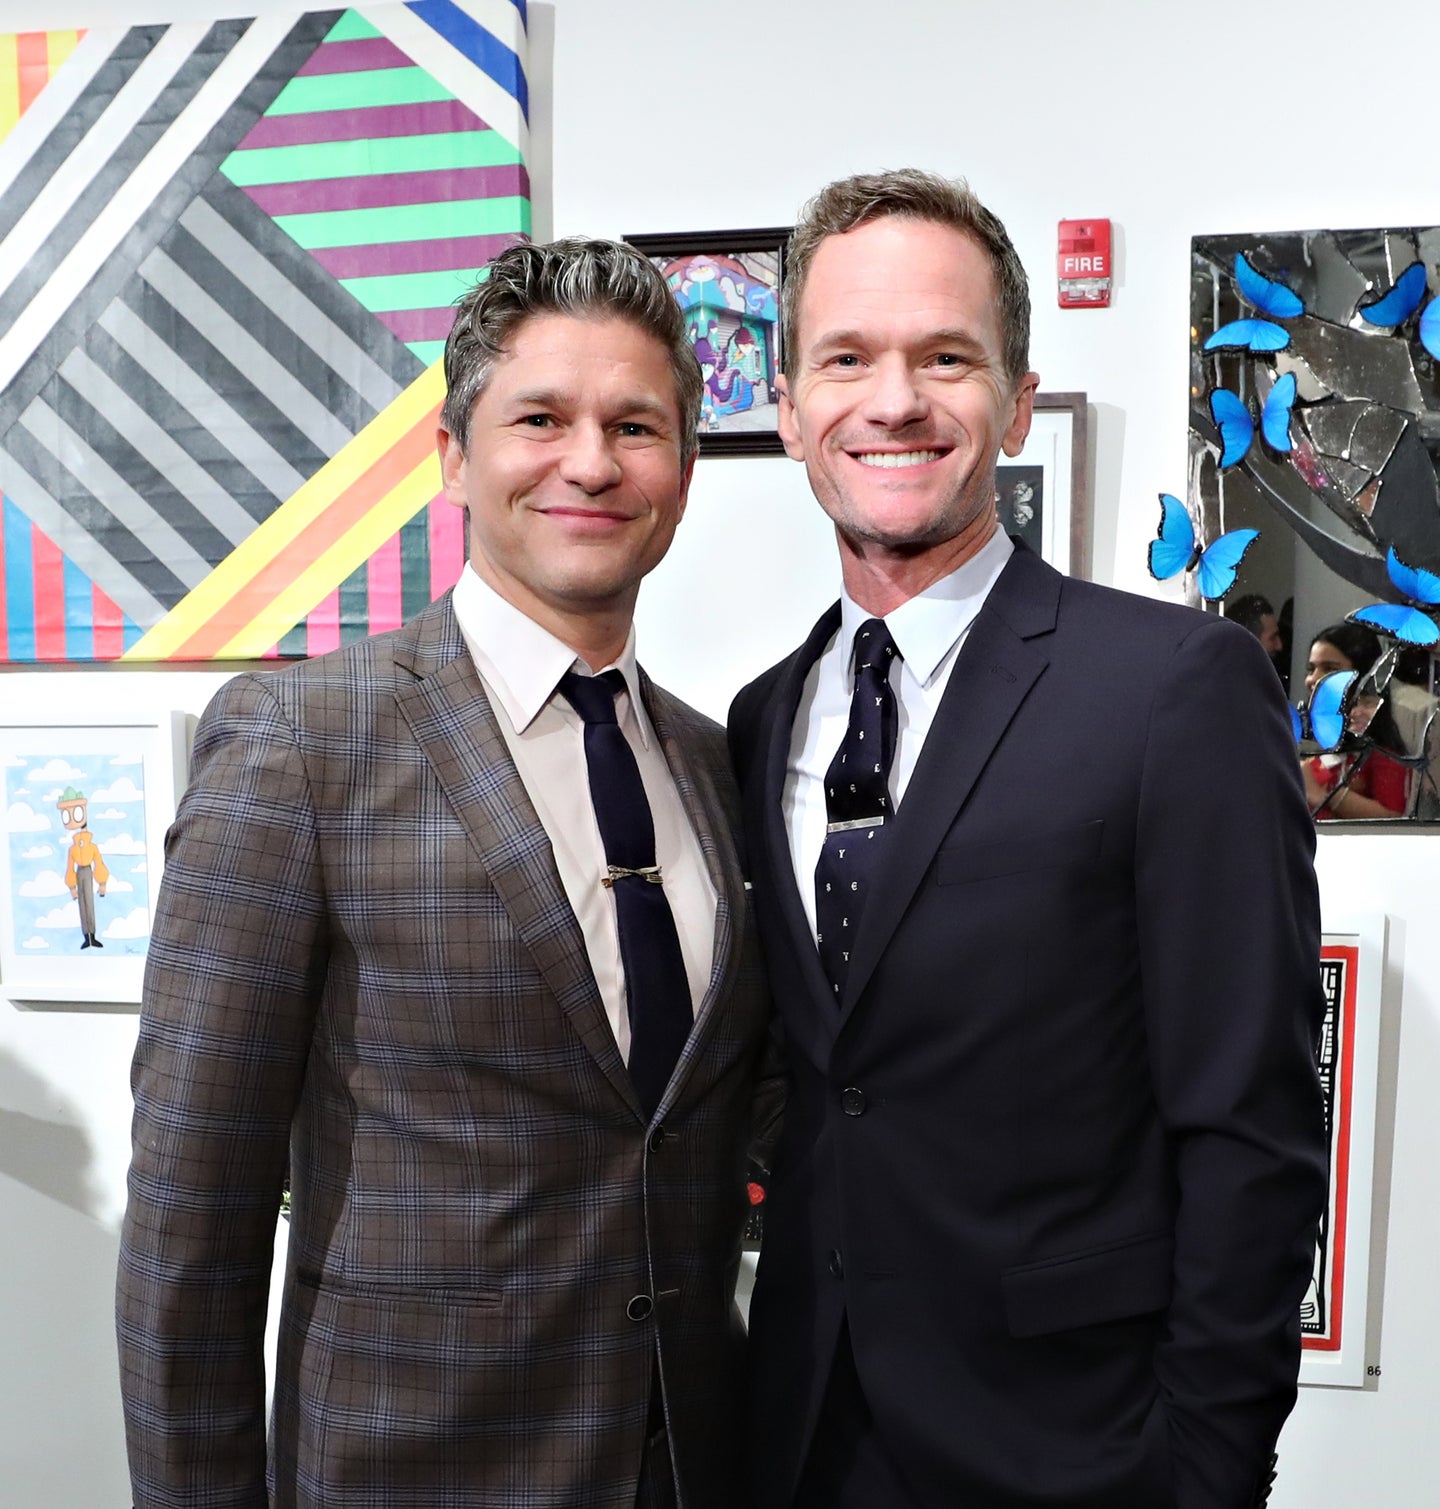 Neil Patrick Harris and David Burtka Know the Best Party Games